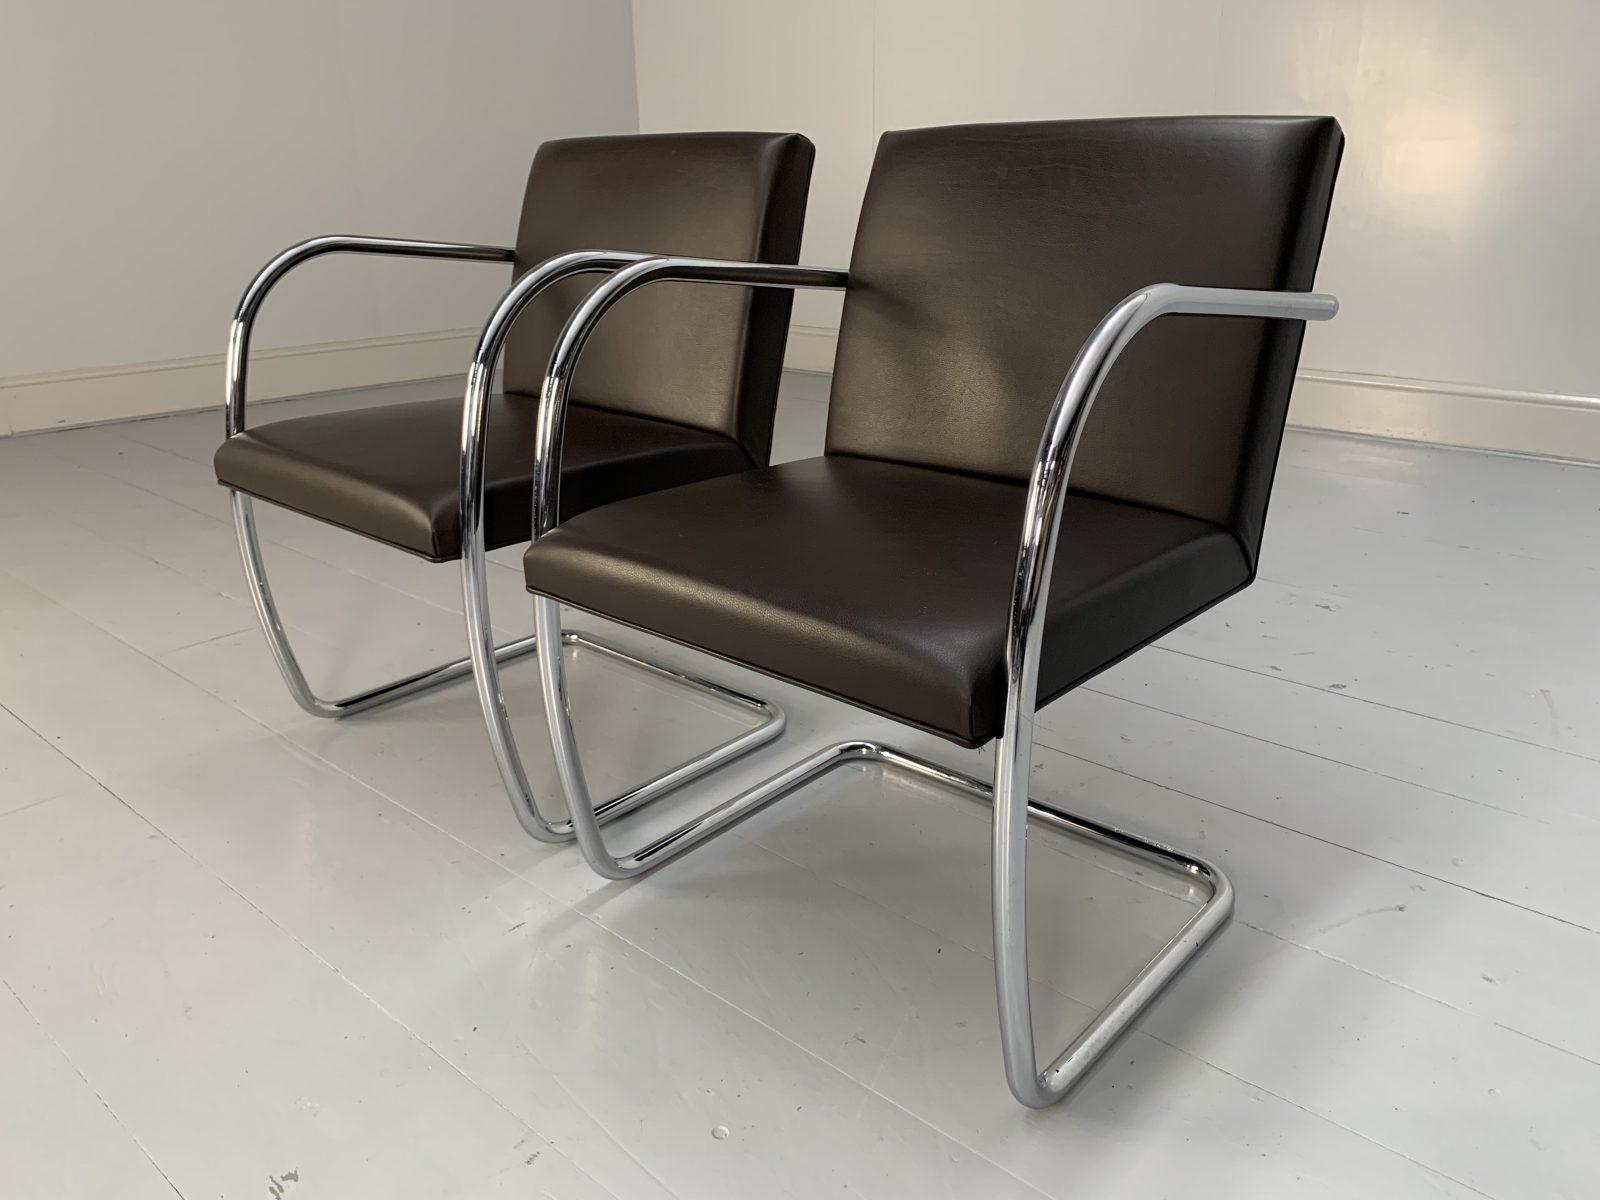 This is a rare, original identical-pair of “Brno Tubular” Armchairs from the world renown furniture house of Knoll Studio, dressed in a sublime, tactile dark-brown leather, and with polished-chrome framework.

In a world of temporary pleasures,